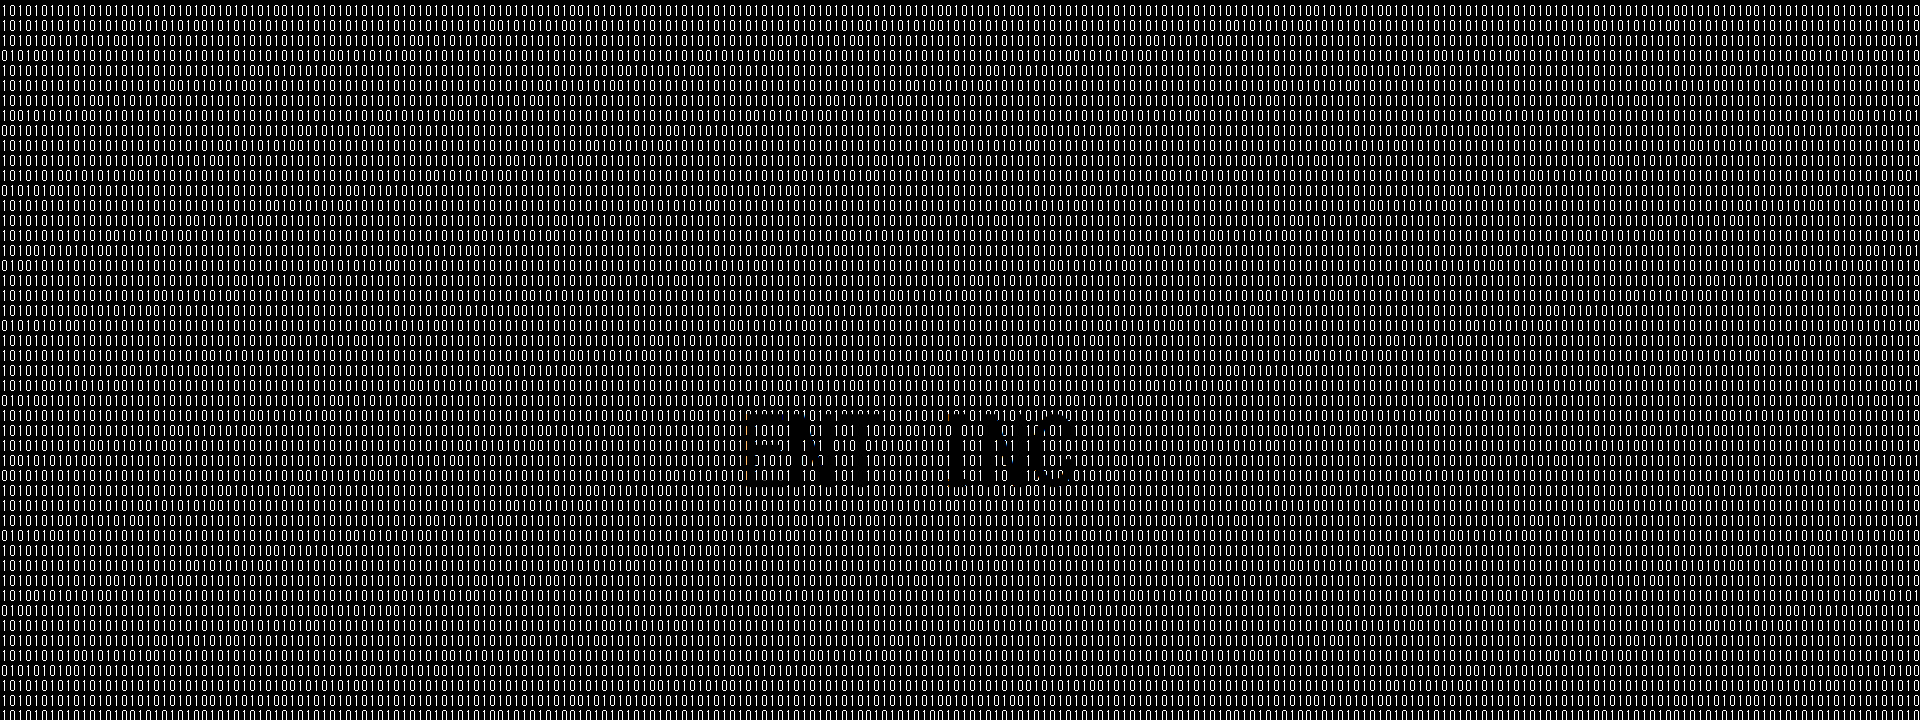 Pong by Ent. Inc.